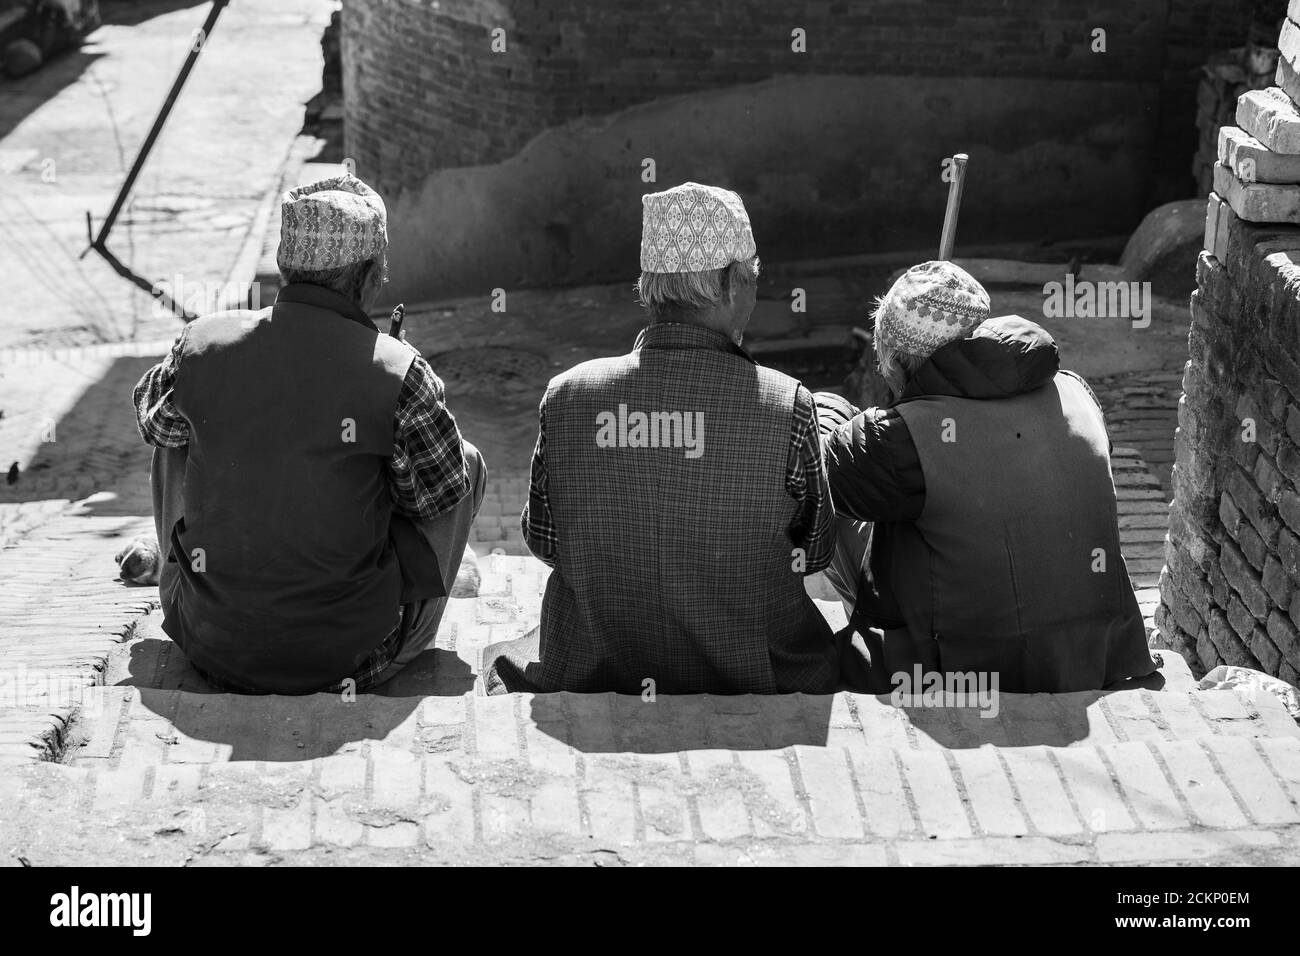 Bhaktapur, Kathmandu, Nepal - December 23, 2019: Three unidentified men sits and talks on the side of the street in some stairs on December 23, 2019 Stock Photo